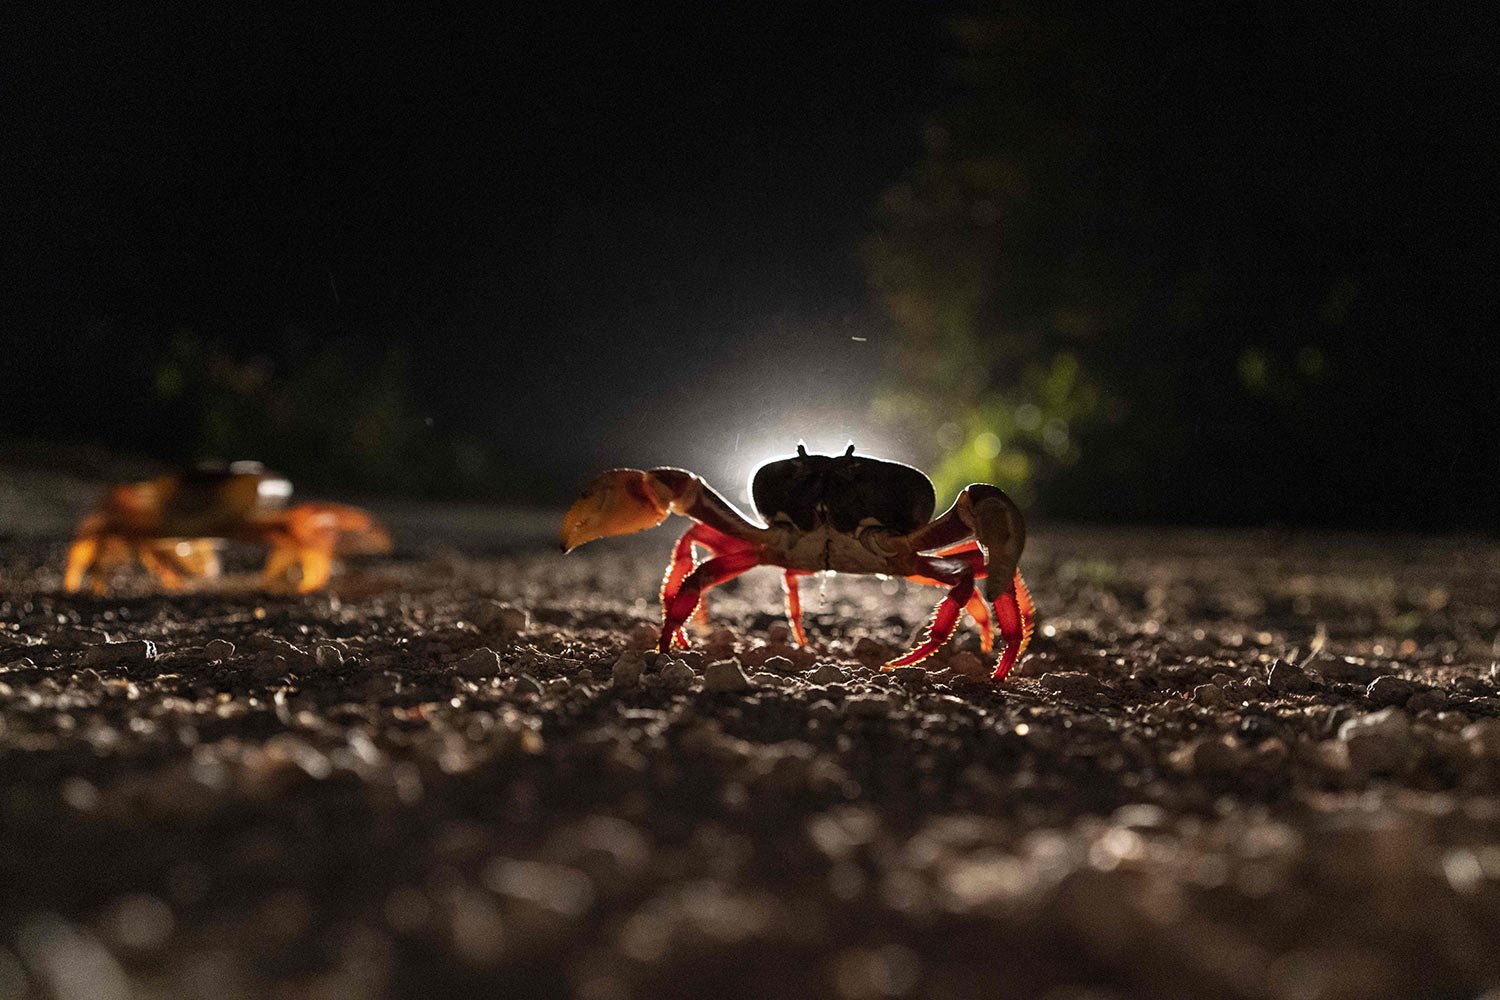  Crabs cross a road in Giron, Cuba, April 10, 2022. Millions of crabs emerge at the start of Spring rain and start a journey to the Bay of Pigs to spawn in a yearly migration. (AP Photo/Ramon Espinosa) 